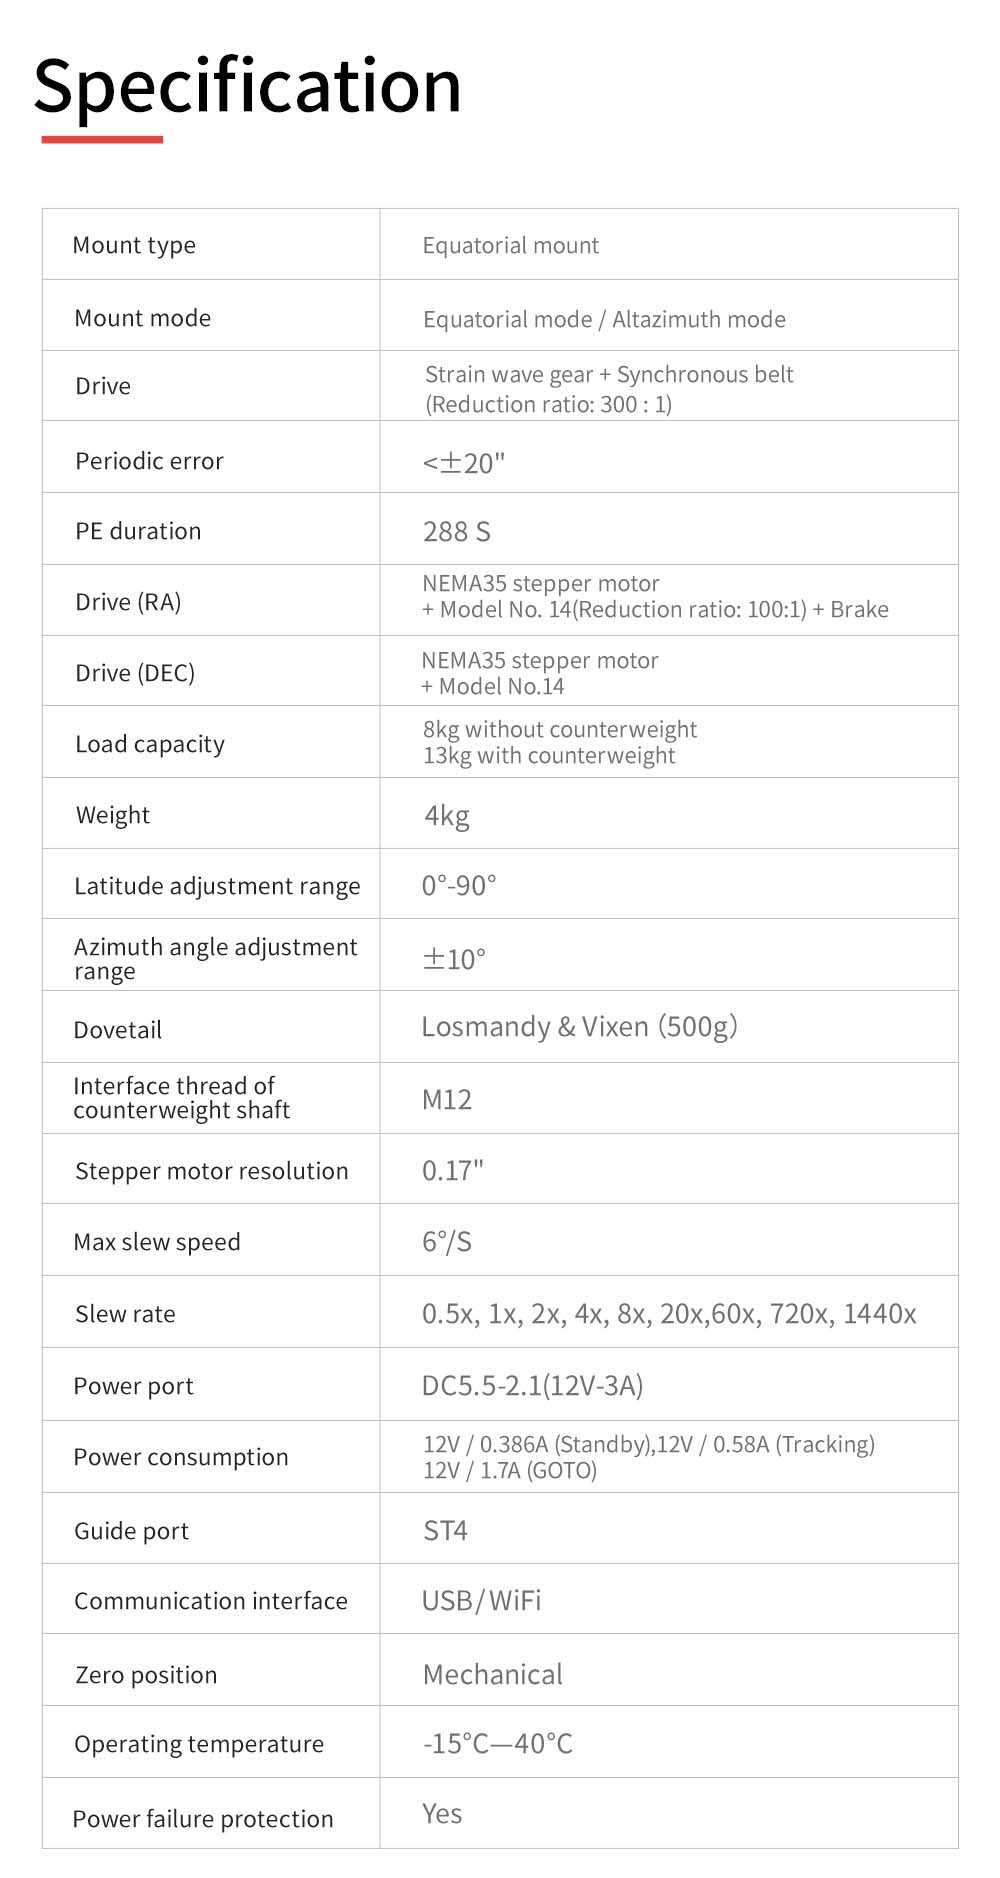 ZWO AM3 Harmonic Equatorial Mount Specifications